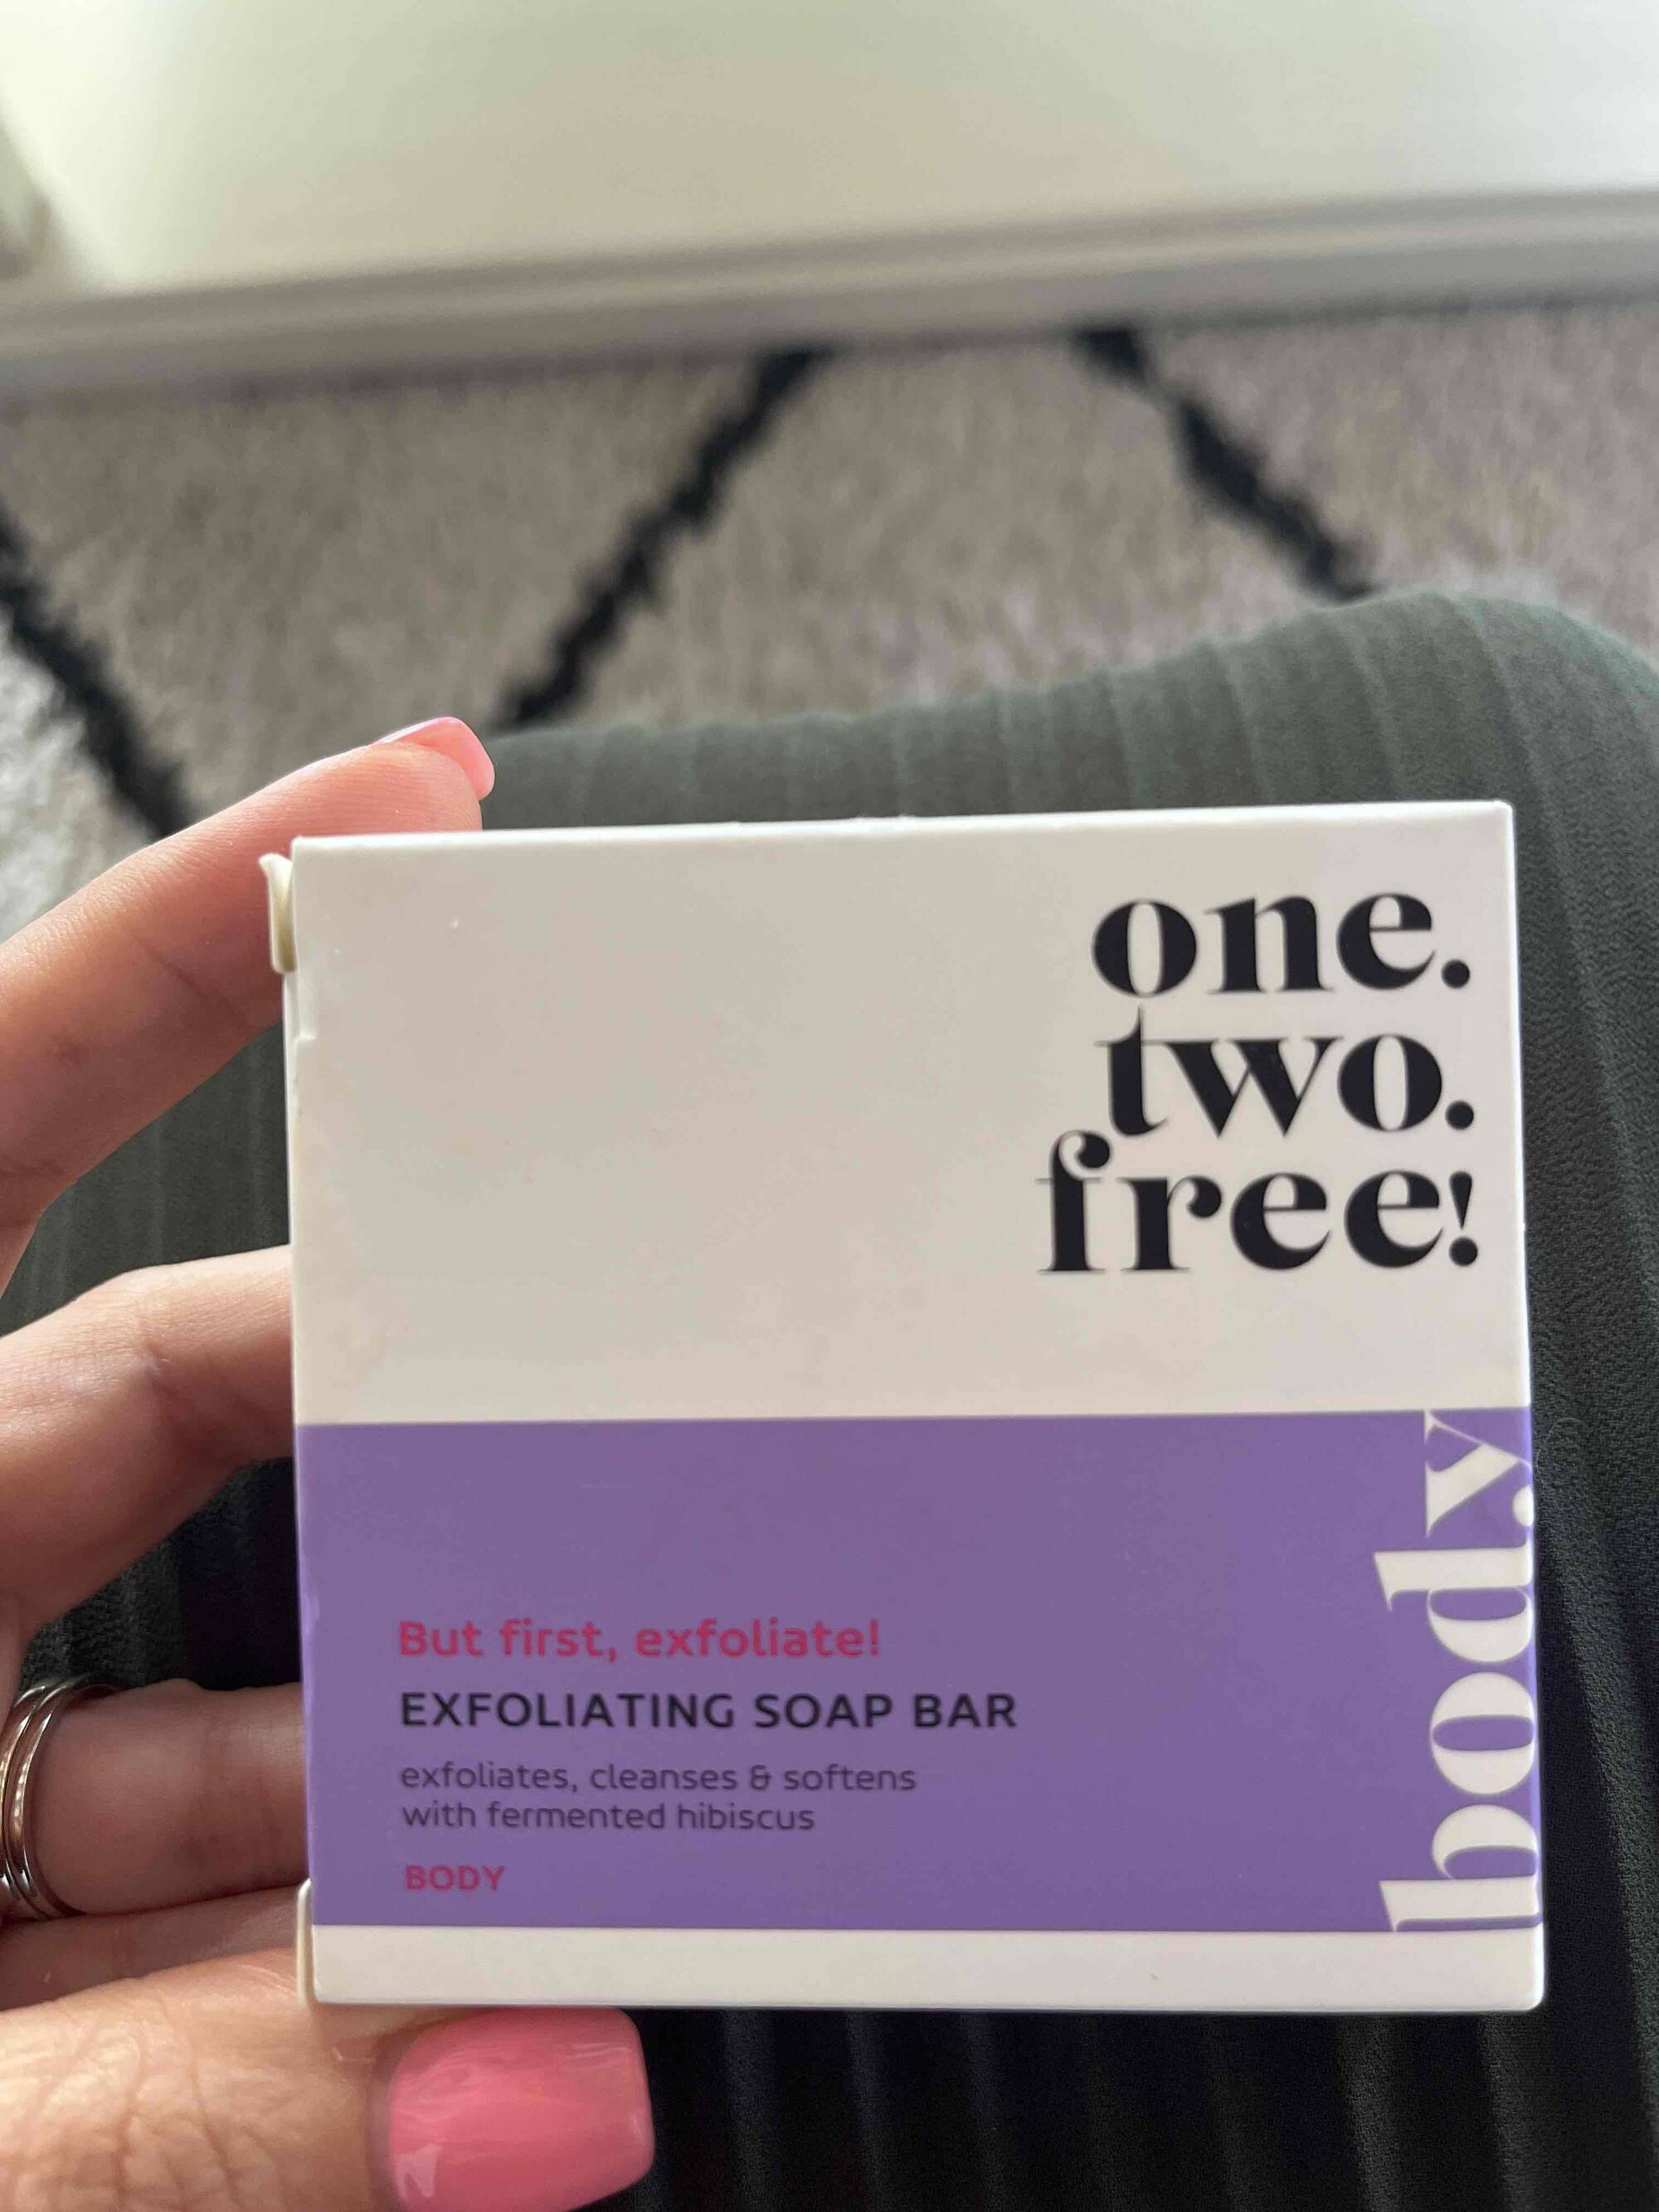 ONE.TWO.FREE! - Exfoliating soap bar